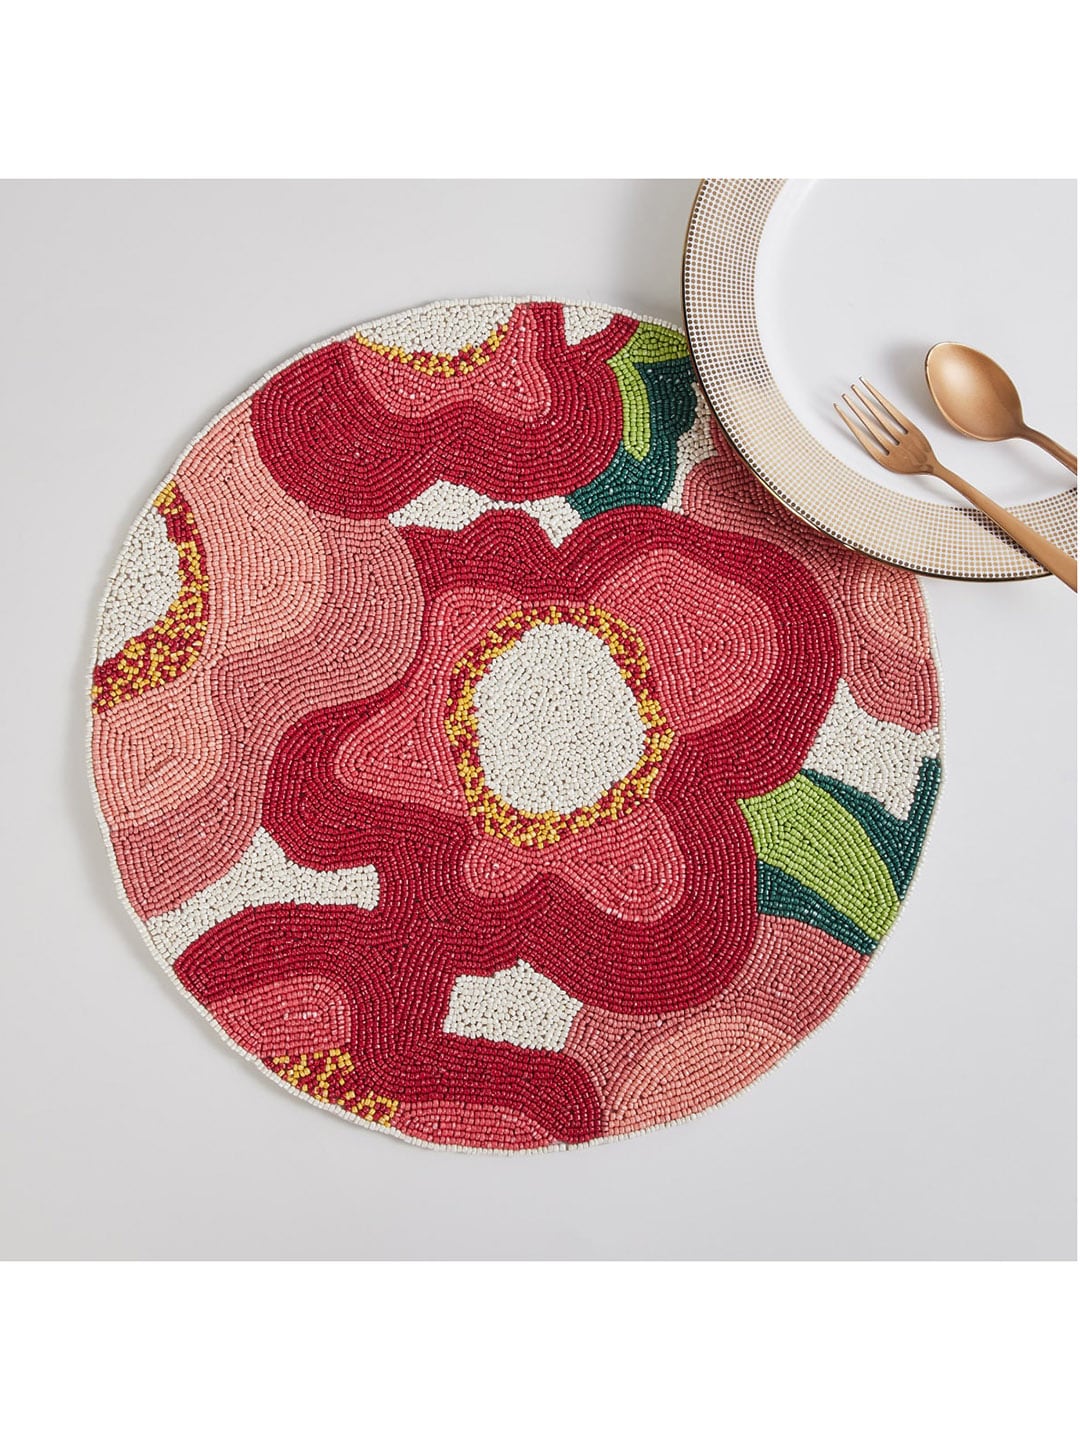 Home Centre Red Mandarin-Bohemian Rhapsody Beaded Glass Round Trivet Placemat Price in India